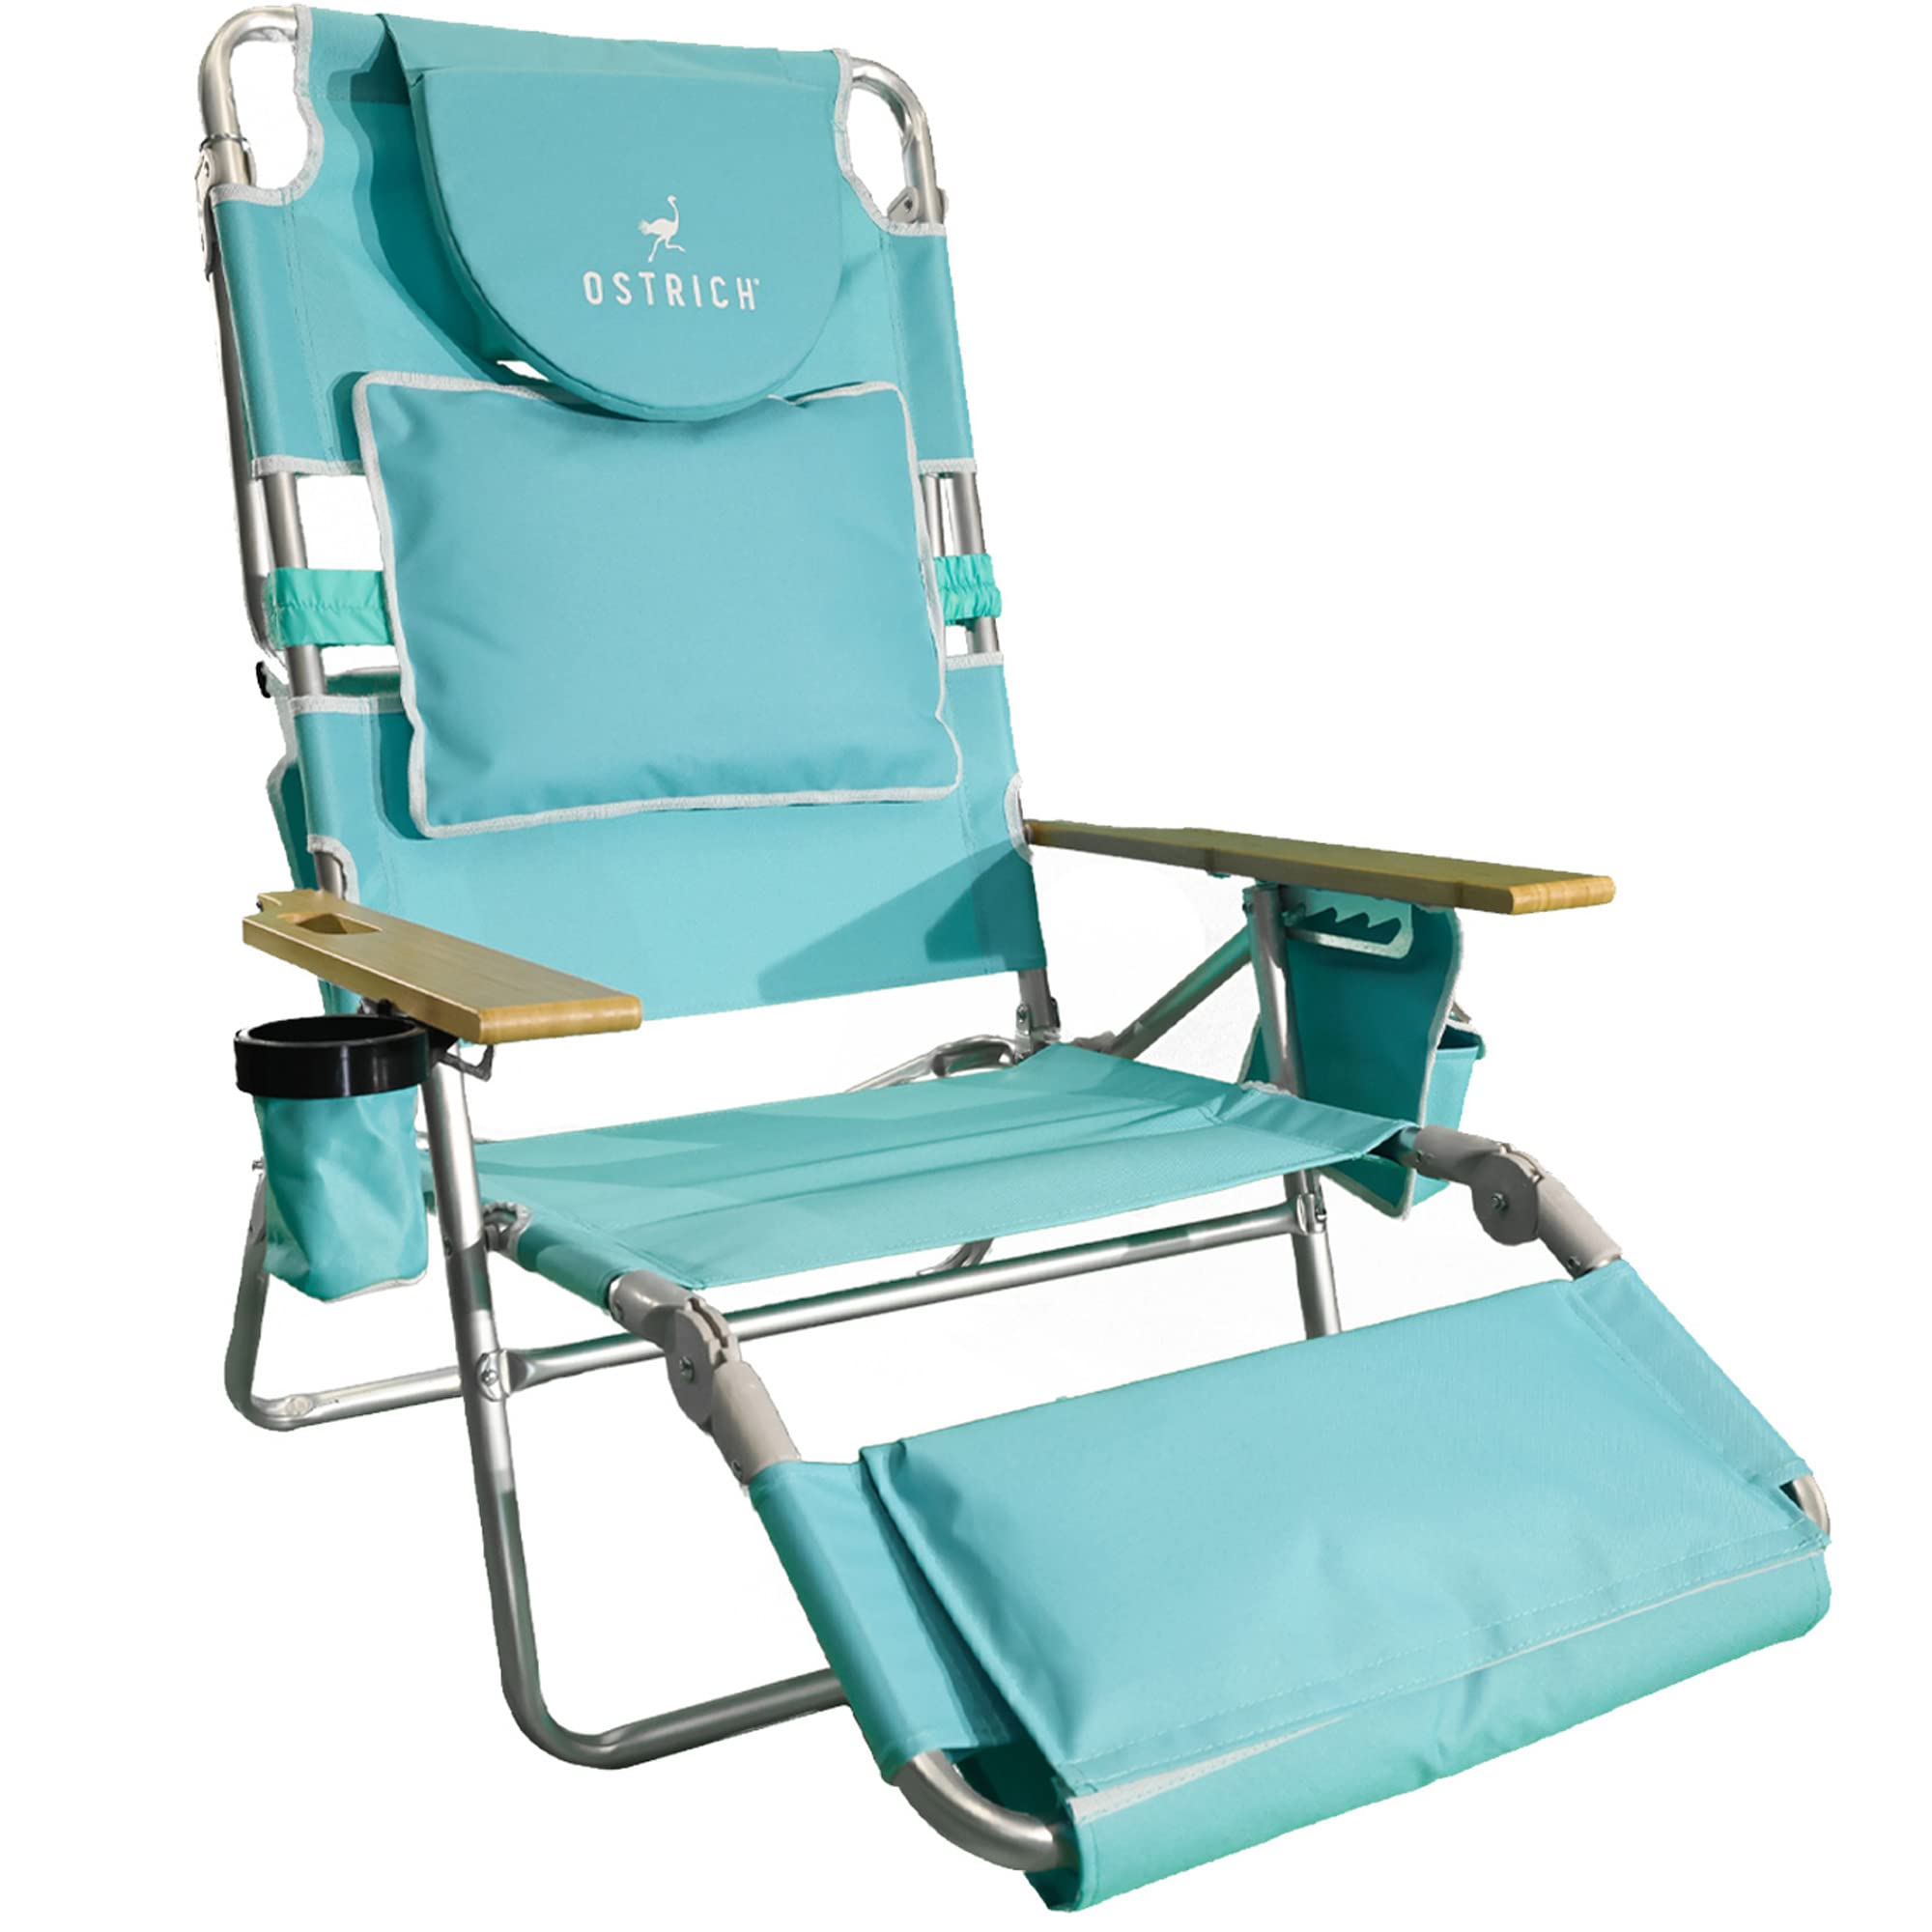 Ostrich Deluxe Padded 3-N-1 Lounge Beach Chair